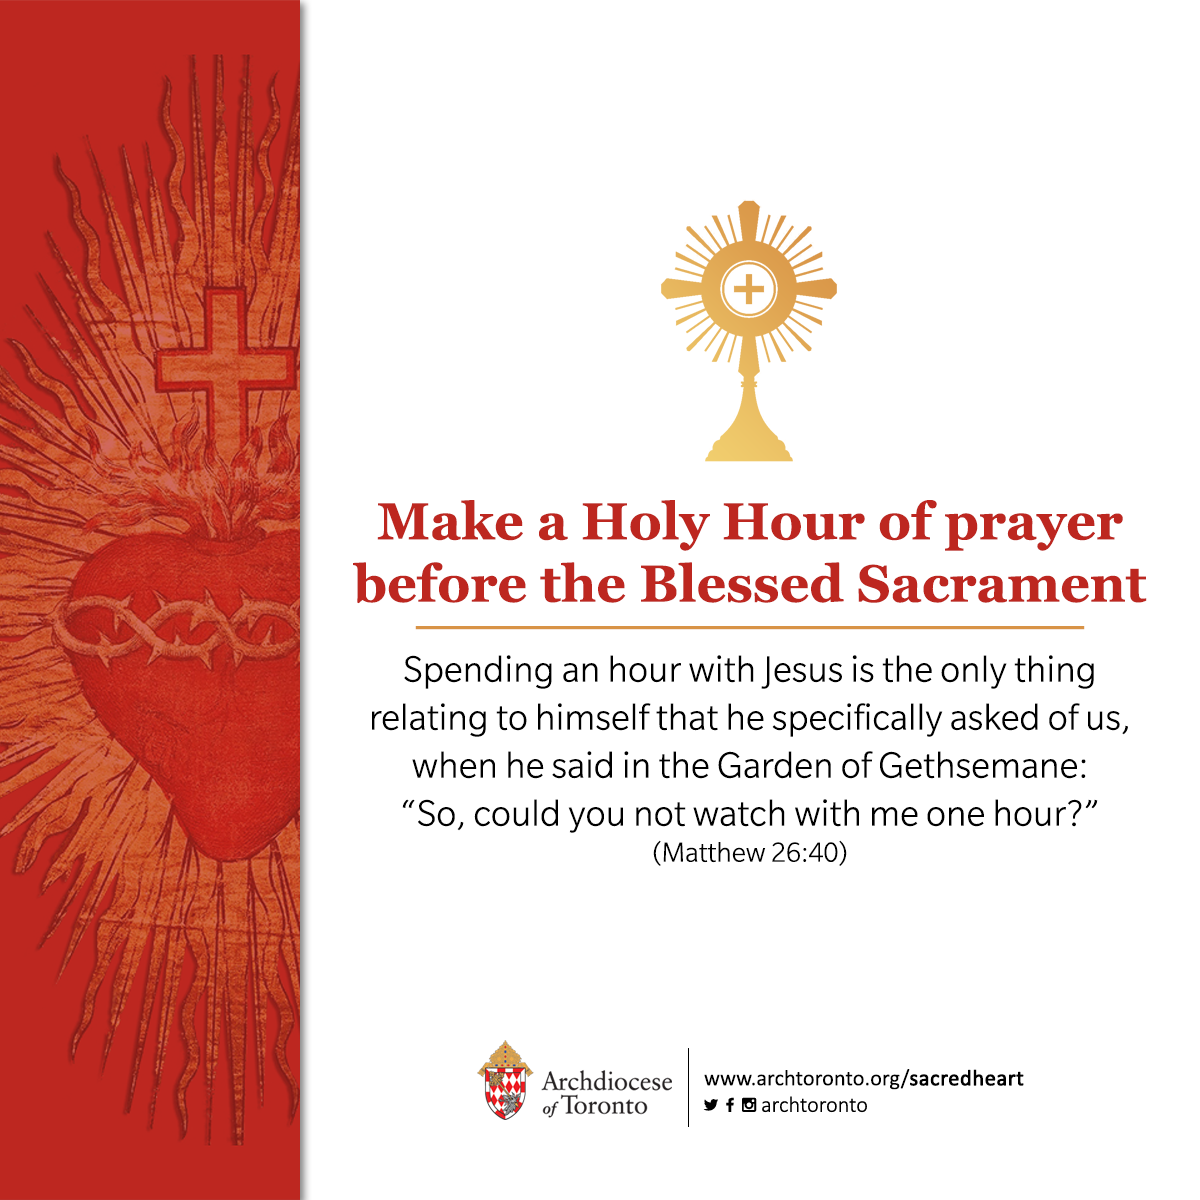 Make a Holy Hour of prayer before the Blessed Sacrament